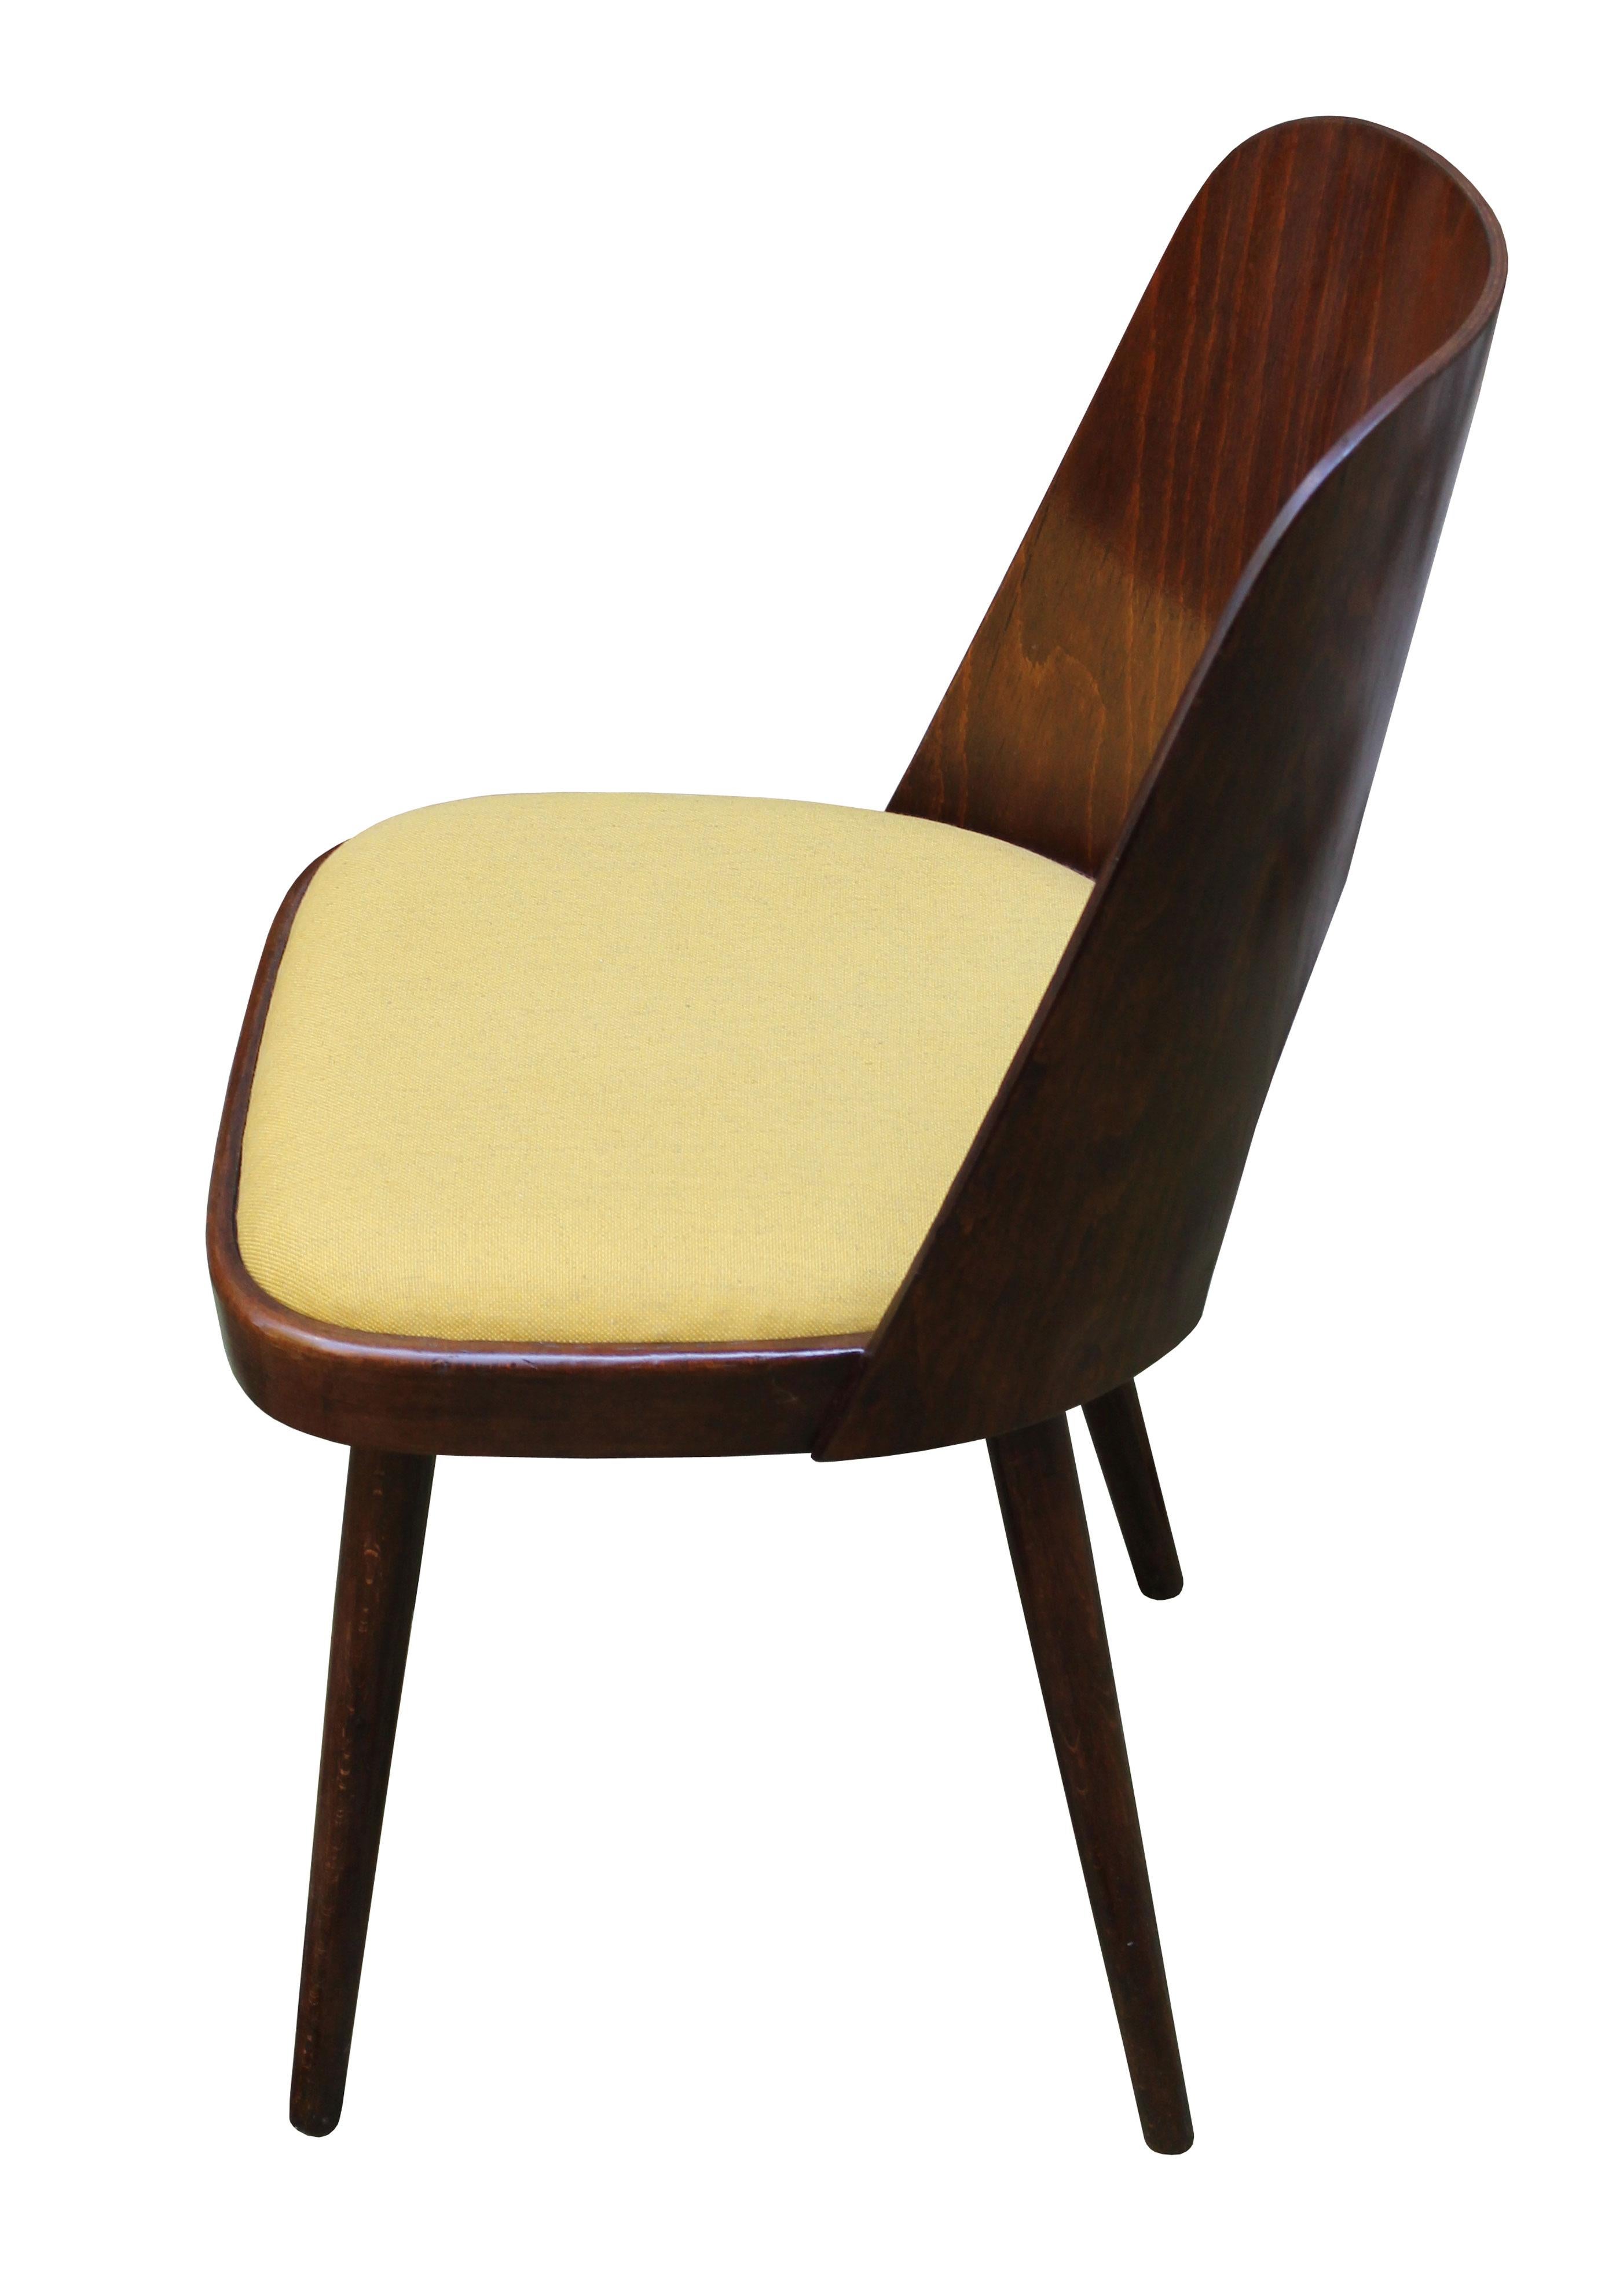 20th Century Mid Century Dining chair n.515 by Oswald Haerdtl for TON Company